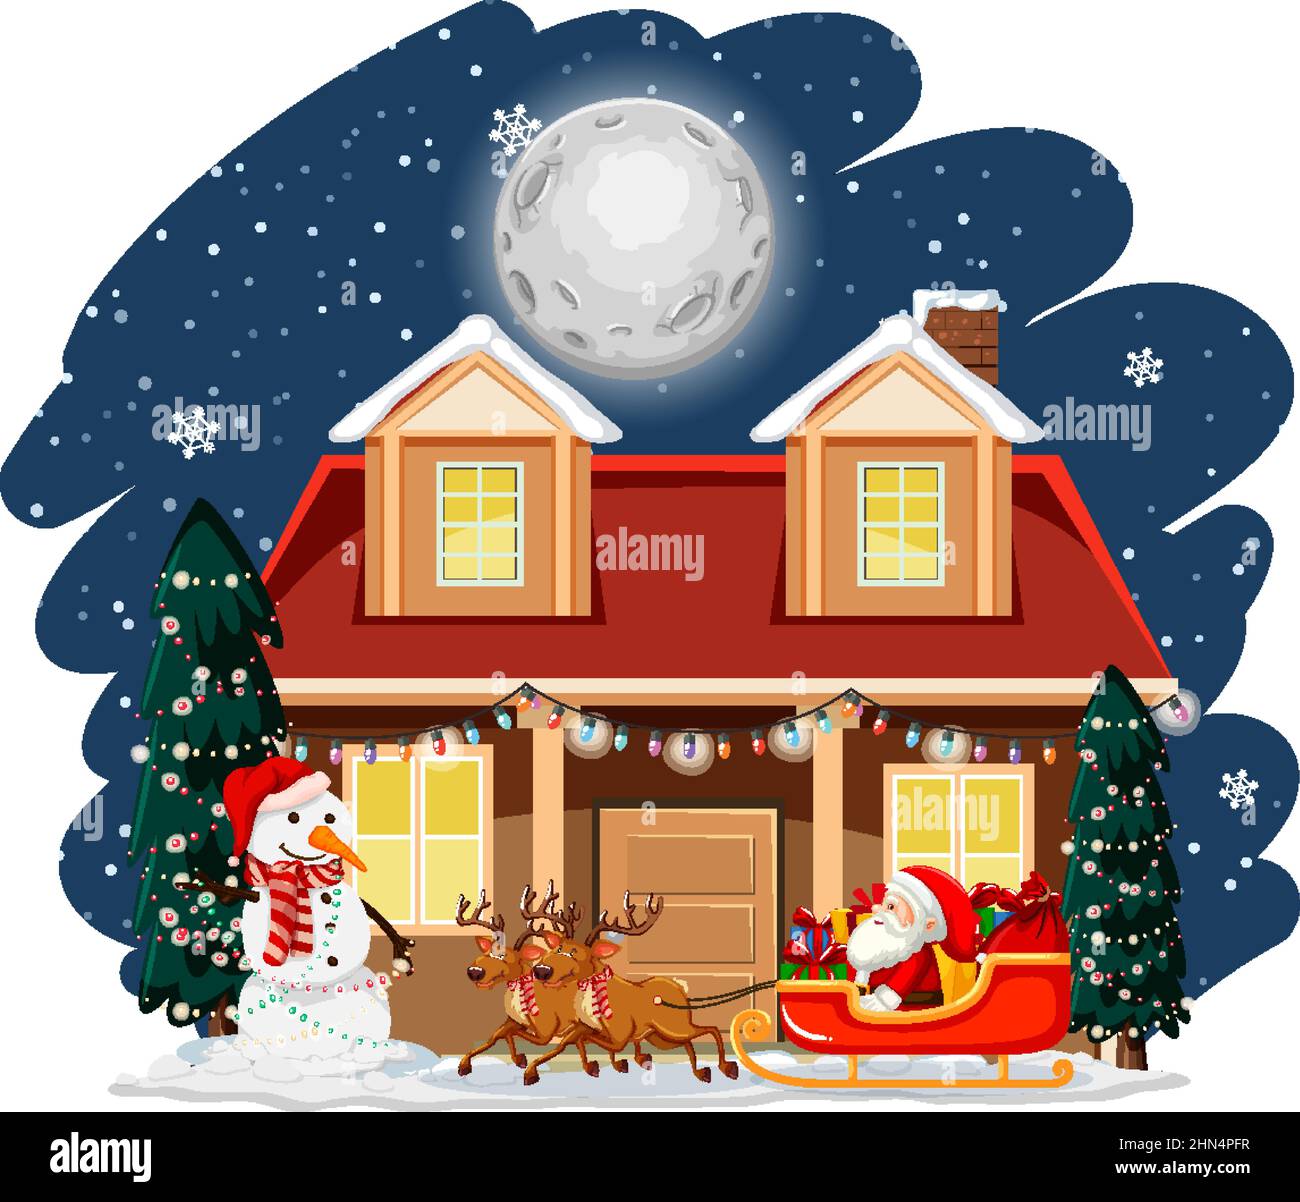 Santa Claus on sleigh in front of house at night scene illustration Stock Vector